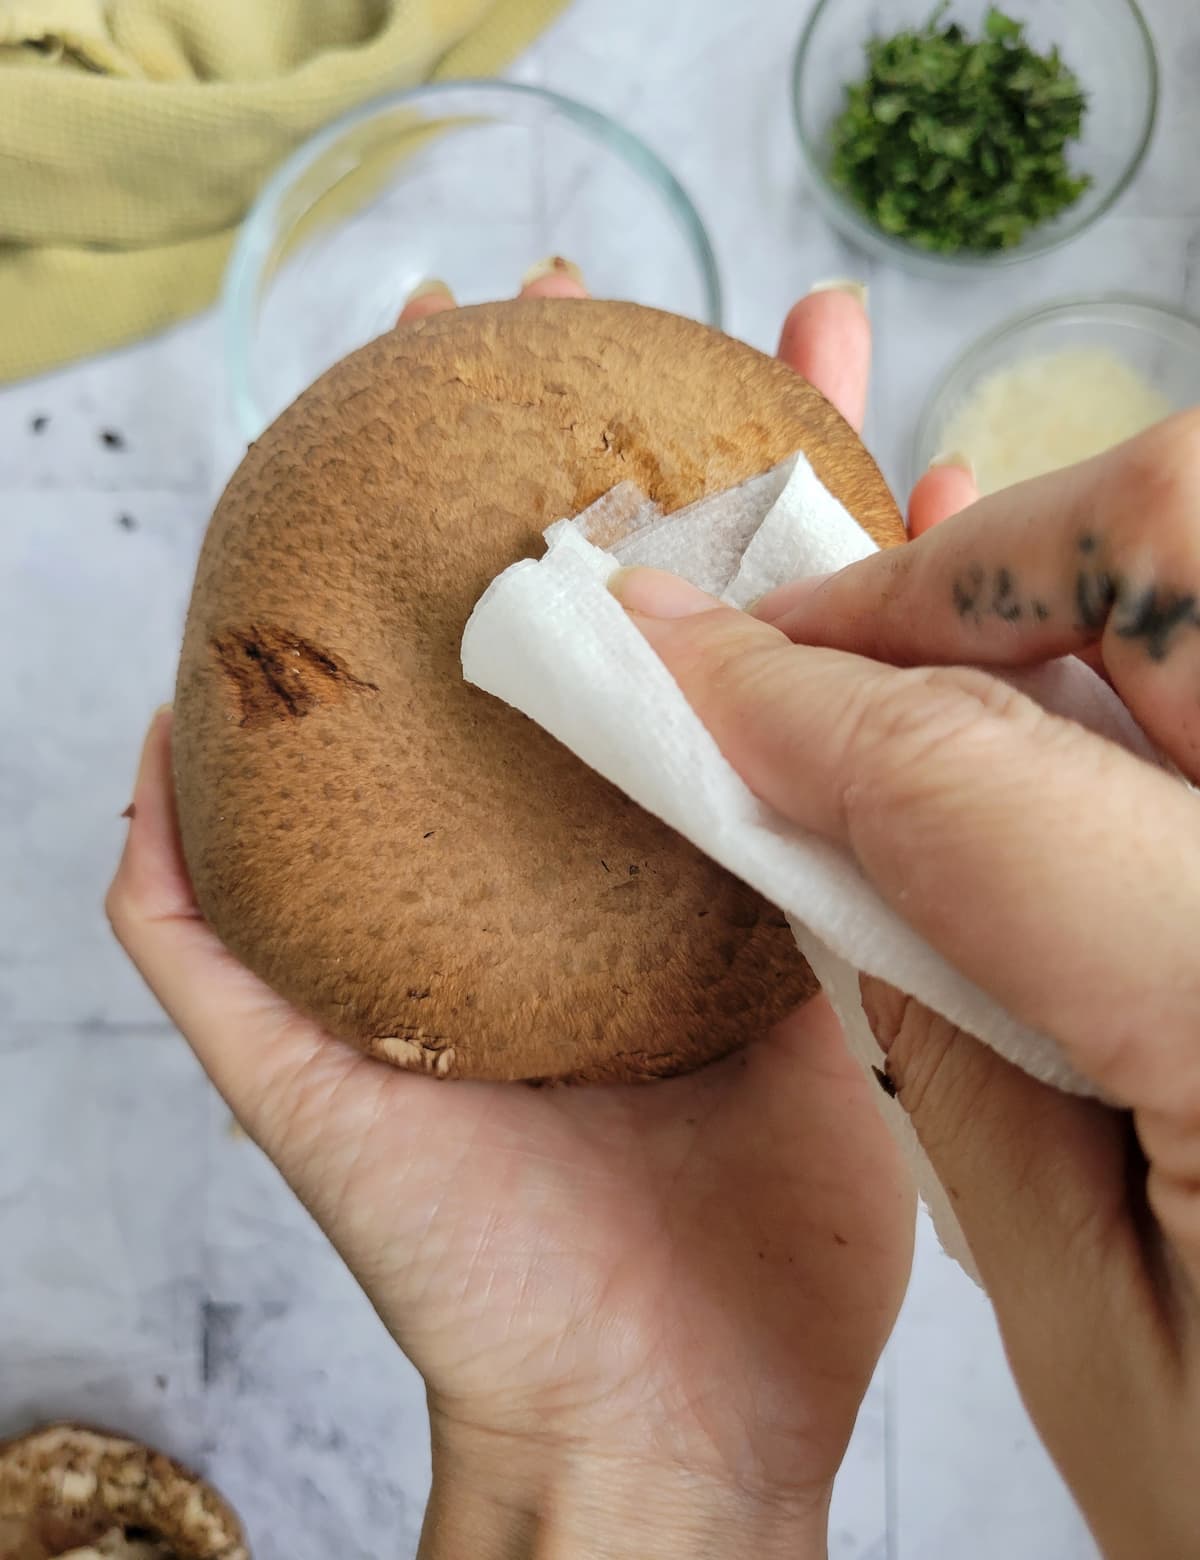 hand with a paper towel wiping the back of a portobello mushroom clean